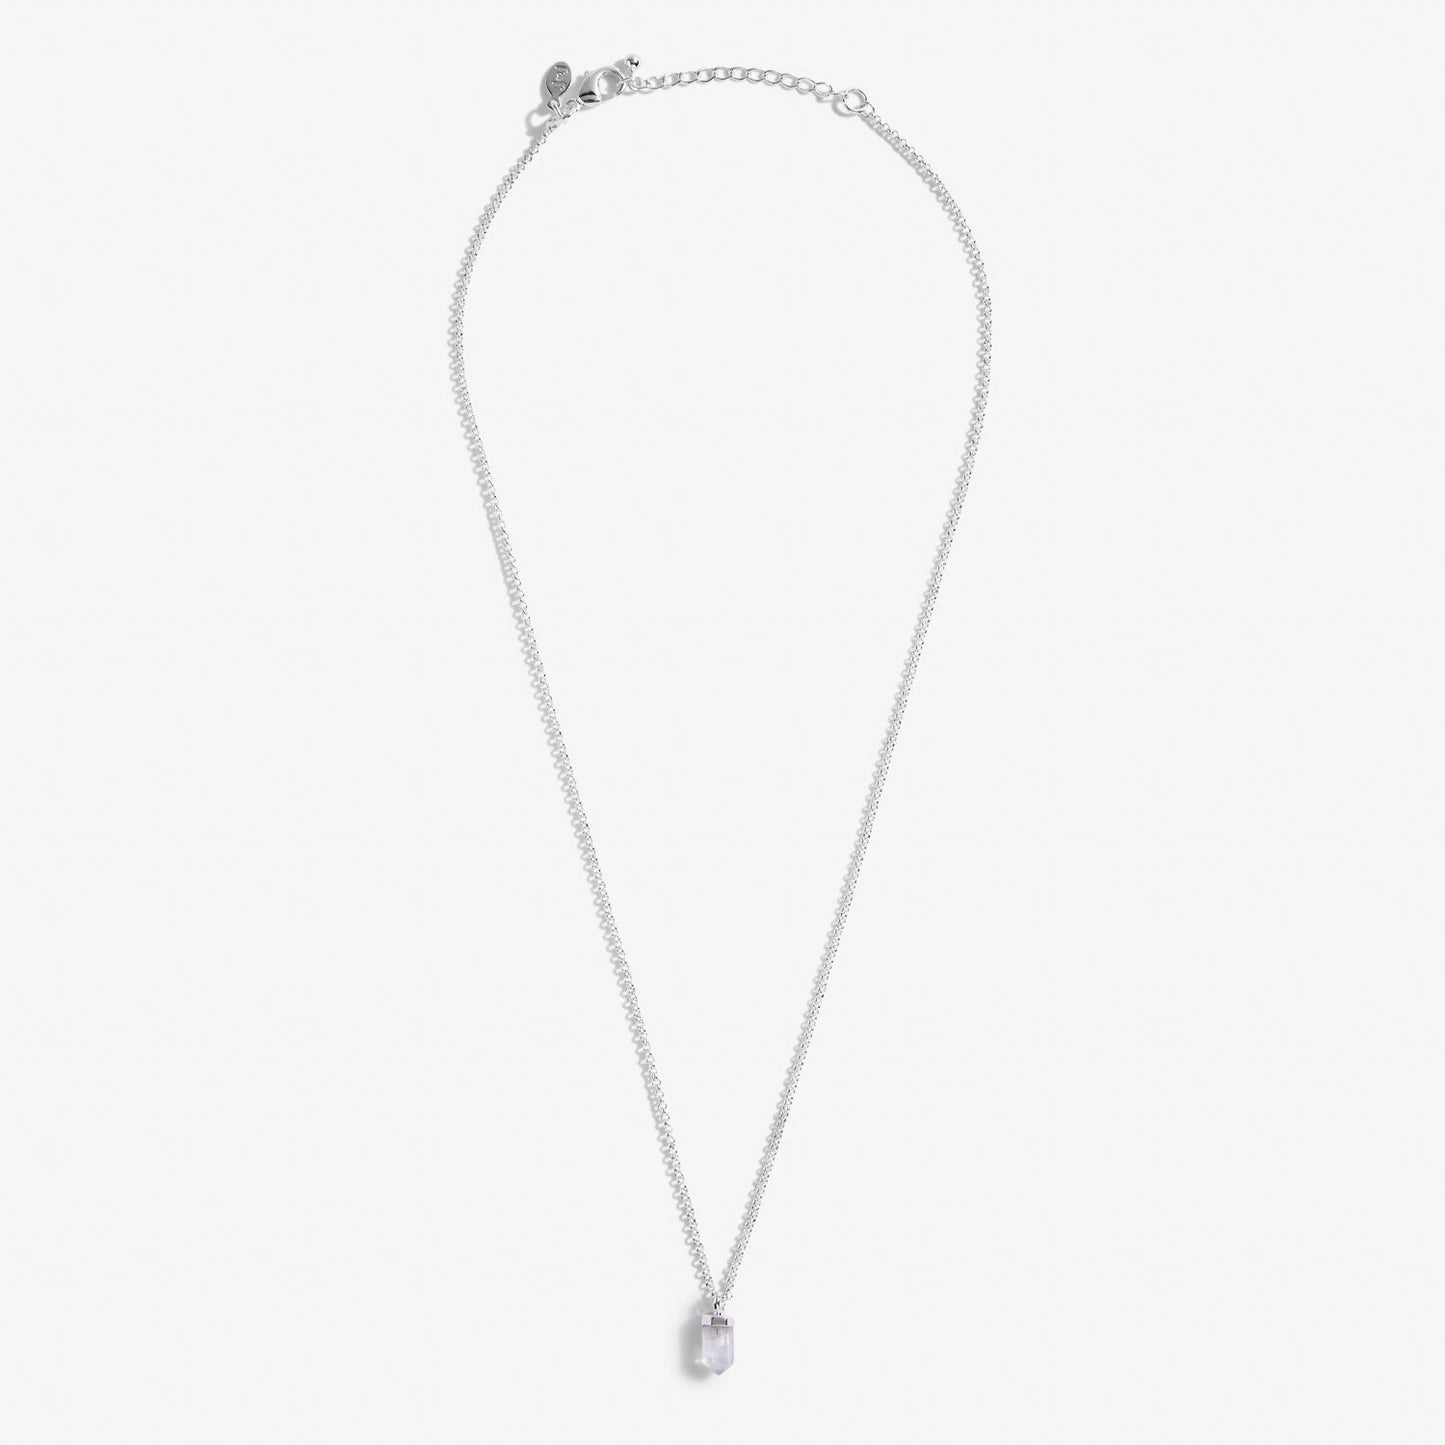 Joma Necklace 5268 - Intuition